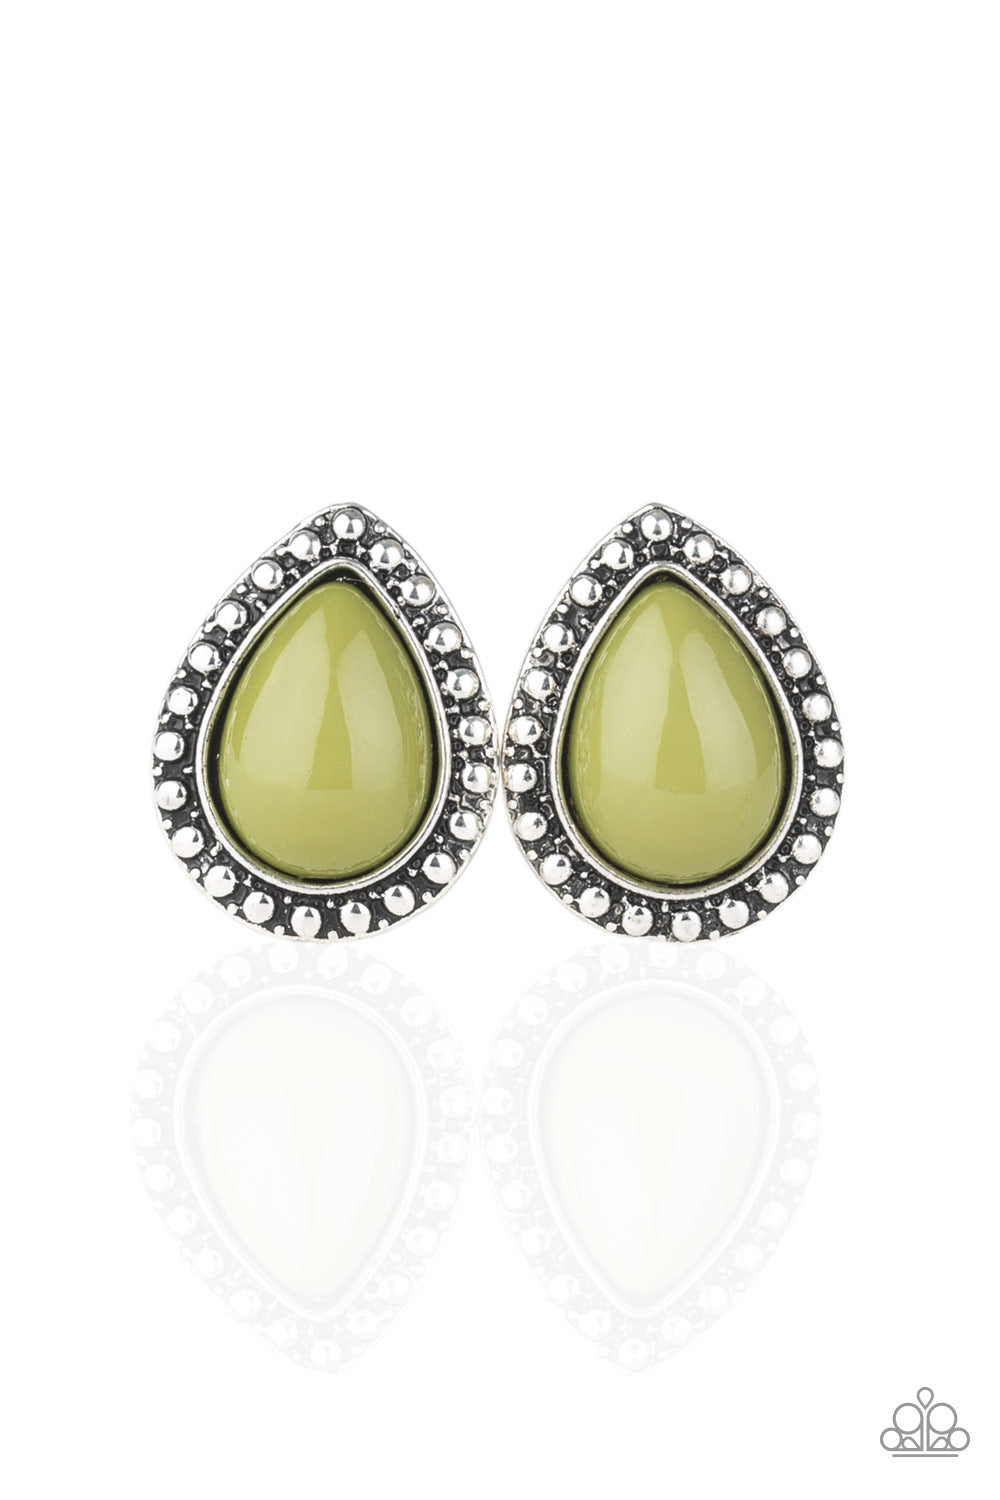 BOLDLY BEADED - GREEN OLIVE AVOCADO TEARDROP BEAD DOTTED SILVER POST EARRINGS